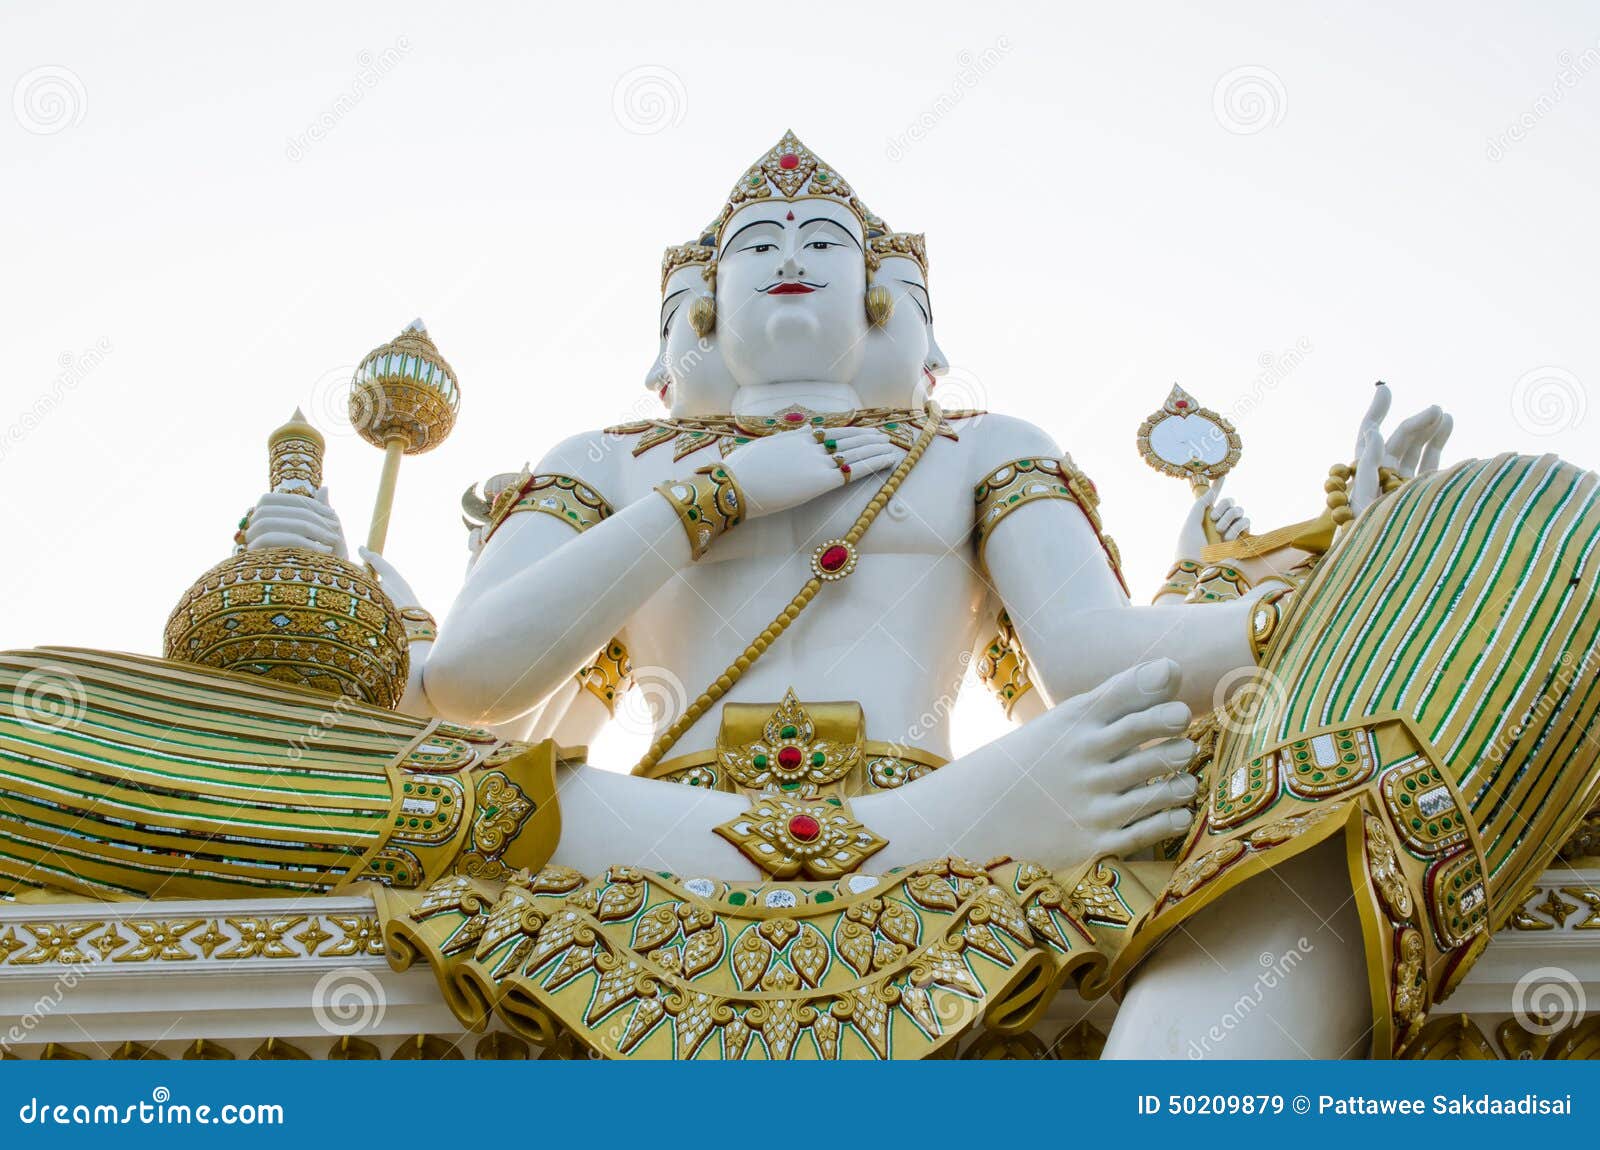 Brahma stock image. Image of temple, gold, colorful, sparks - 50209879